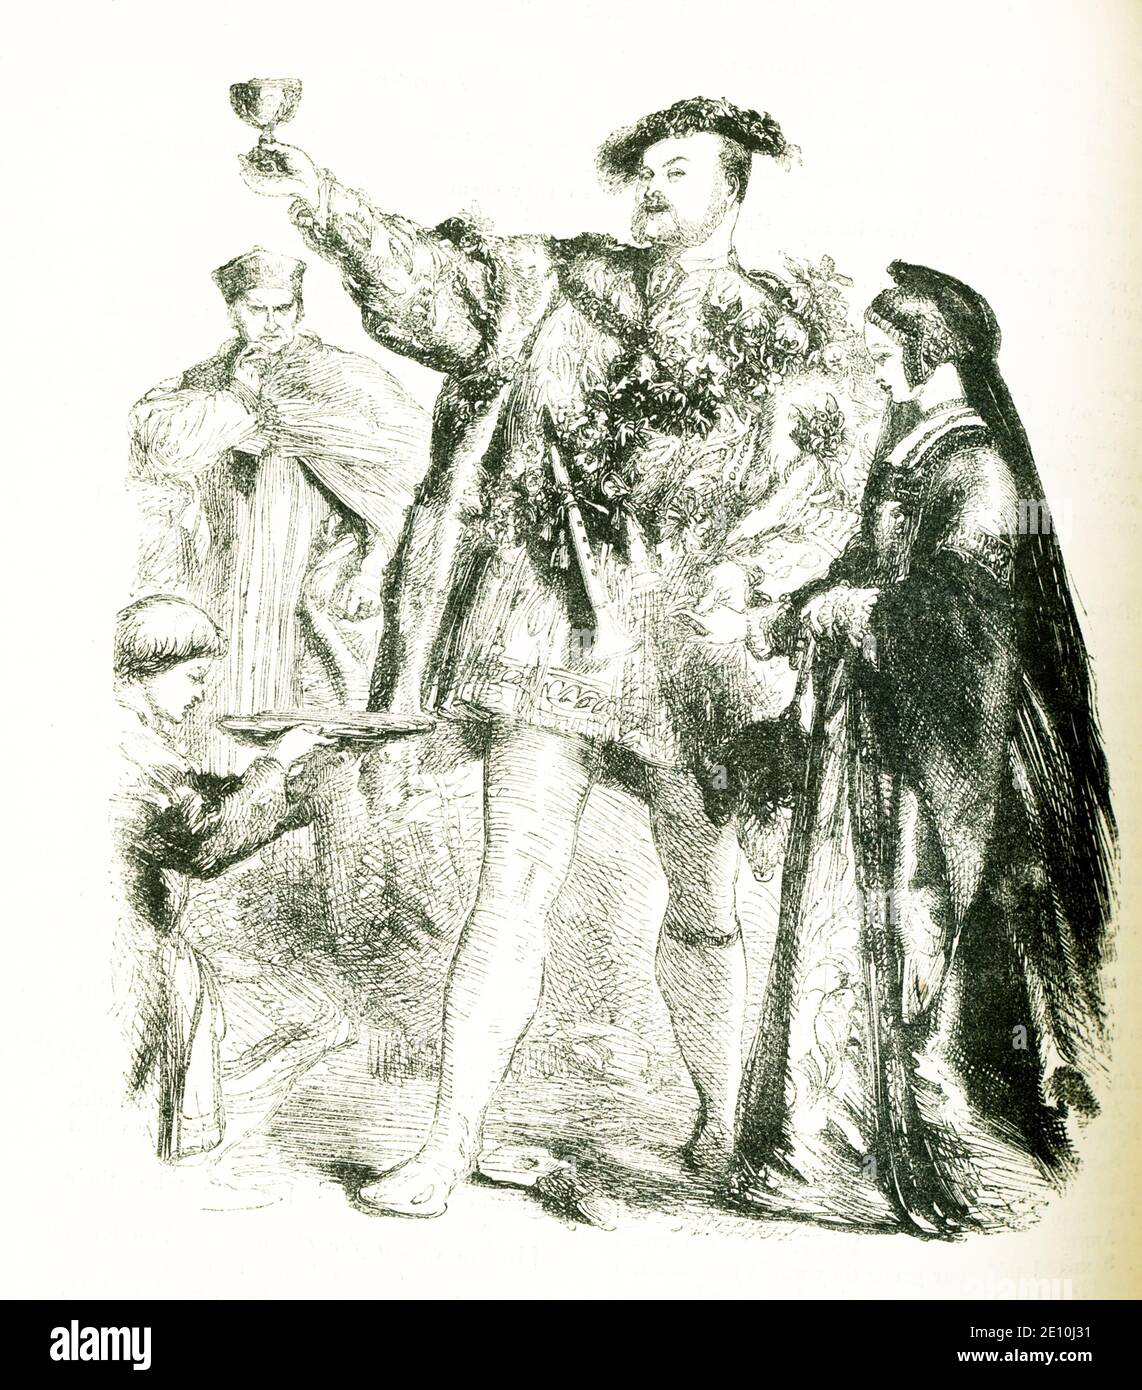 This scene complements William Shakespeare's tragedy titled Henry VIII. It illustrates lines in Act I Scene IV.  Shown here are Henry VIII, Anne Boleyn, and Cardinal Wolsey. The illustration is by Sir John Gilbert (1817-1897), renowned for his prolific illustration of Shakespeare's works. Shakespeare was born in 1564 and died in1616. The book dates to 1887. Stock Photo